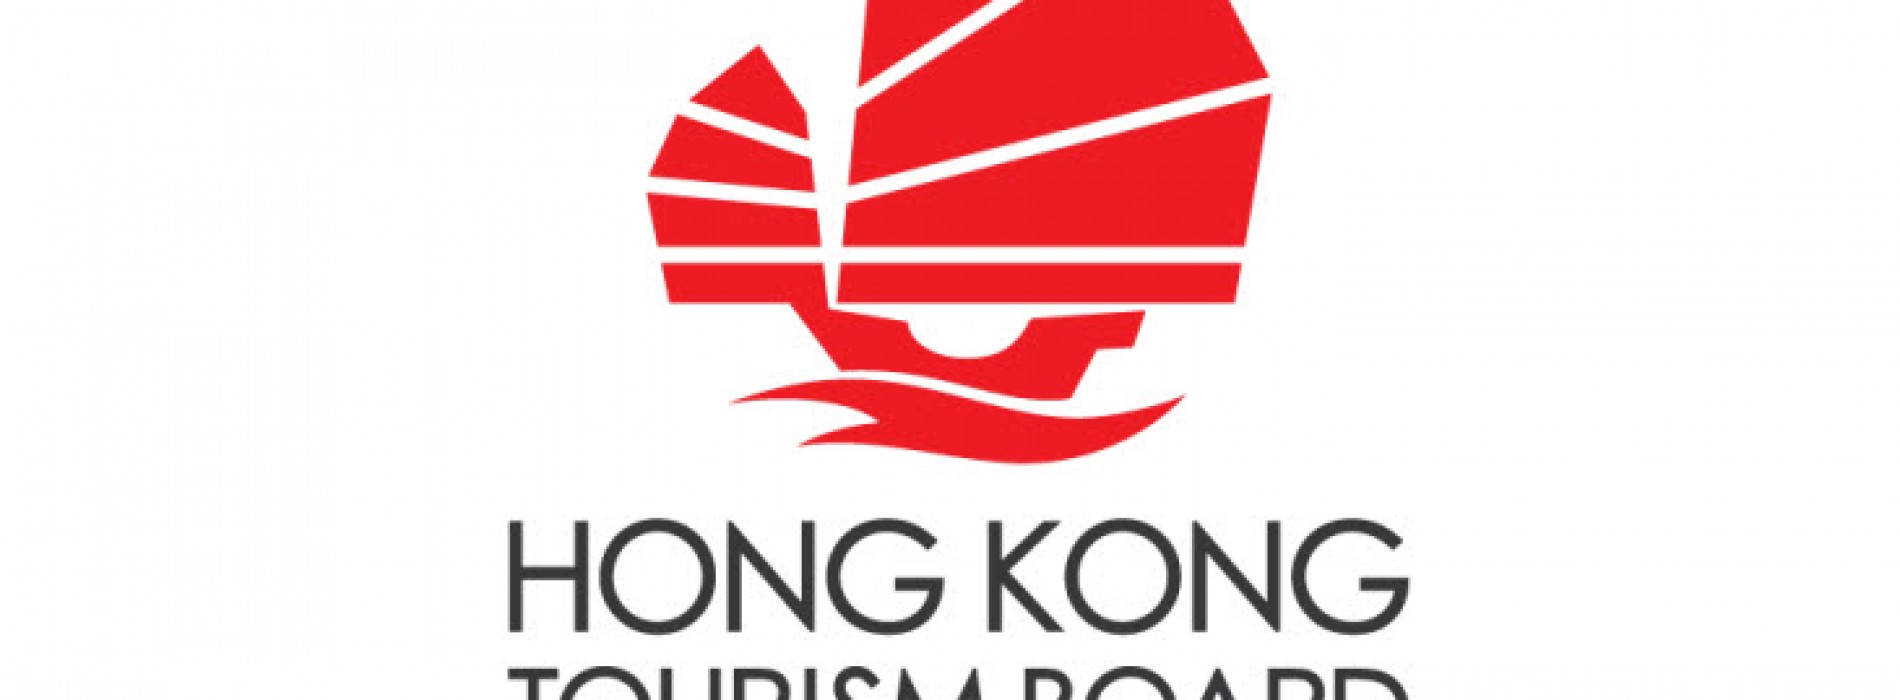 TIRUN offers all-inclusive ‘Fly – Cruise’ packages to Hong Kong